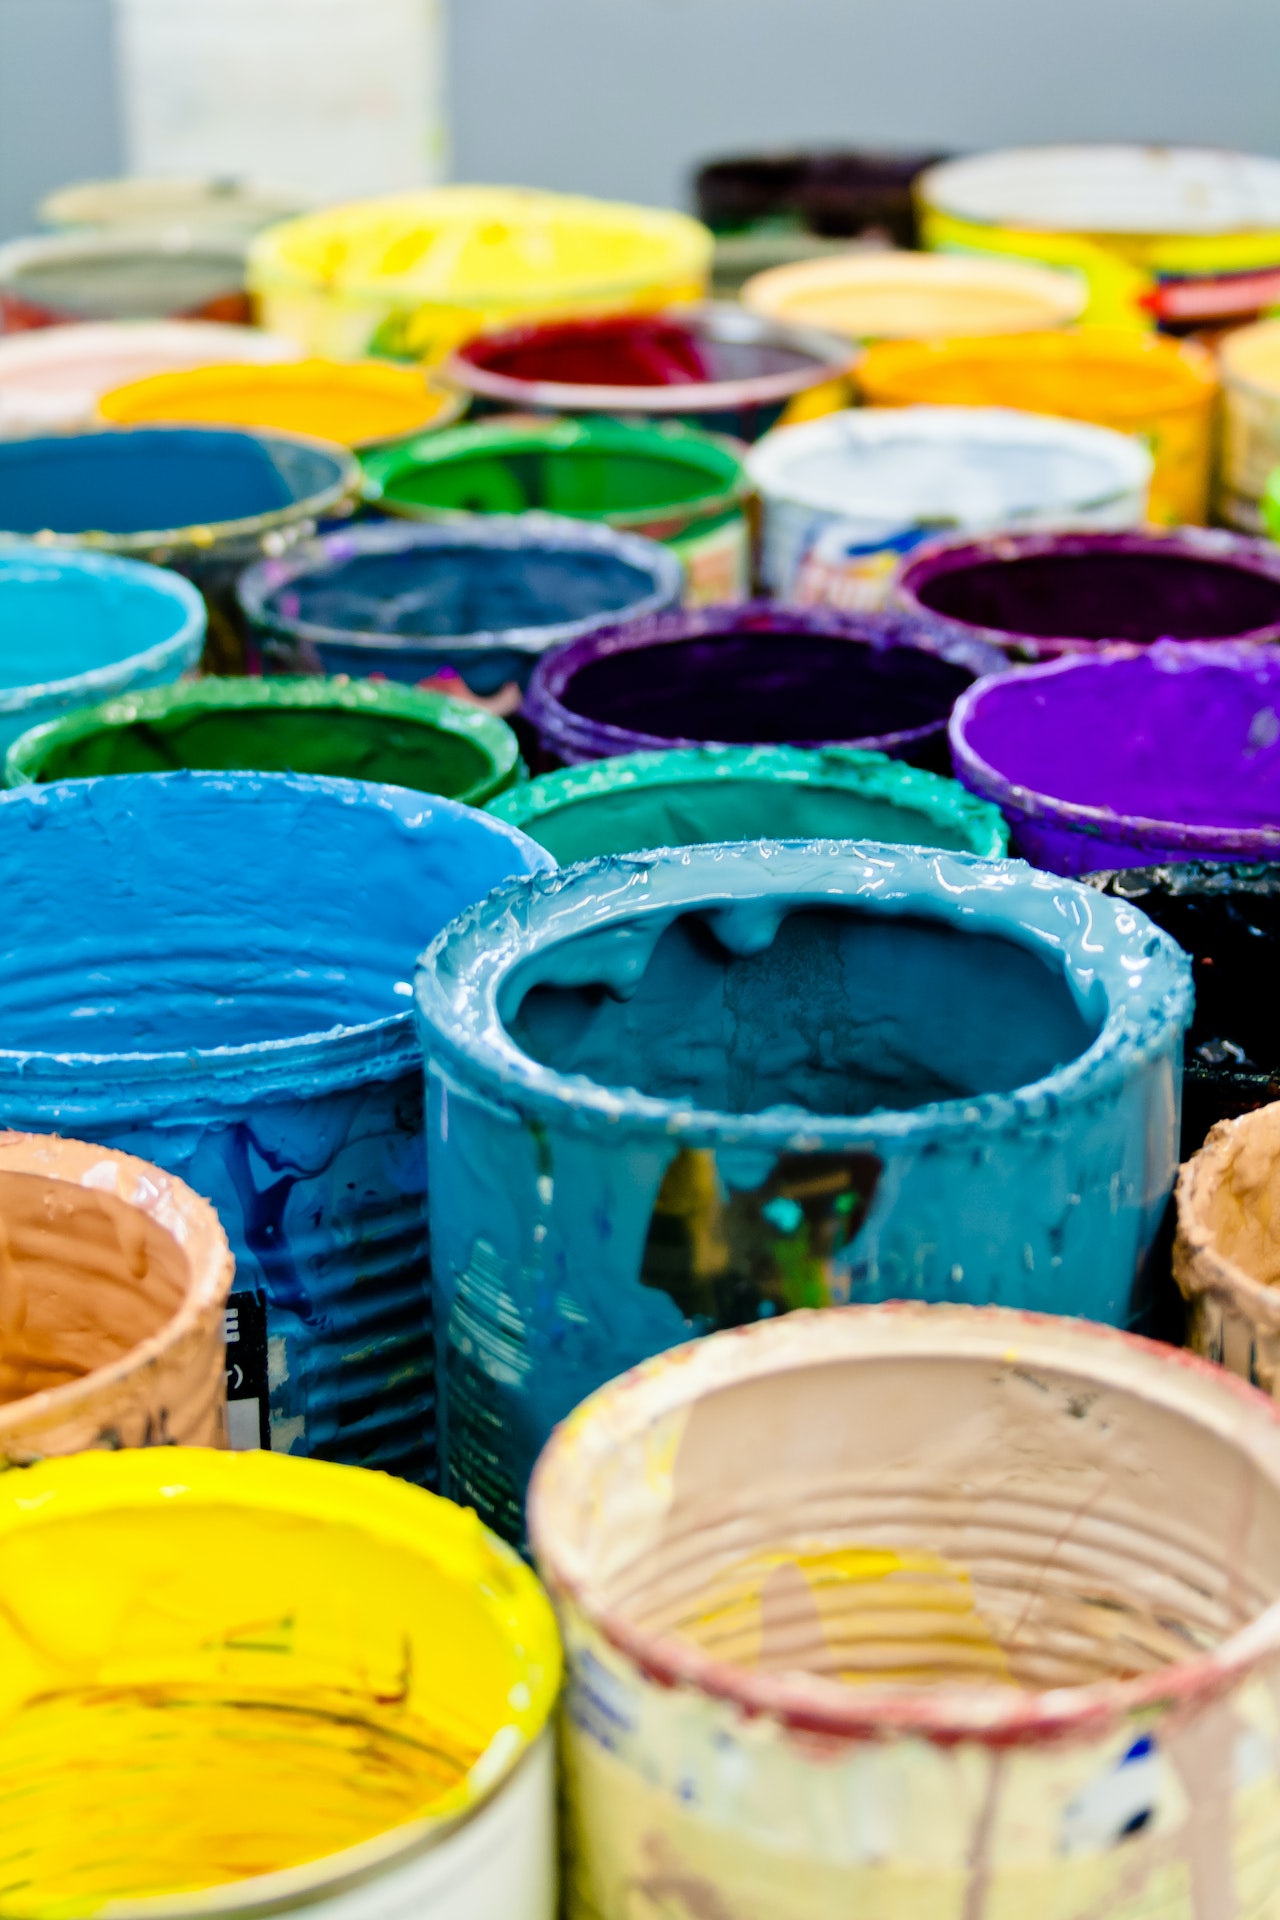 PAINT MANUFACTURING